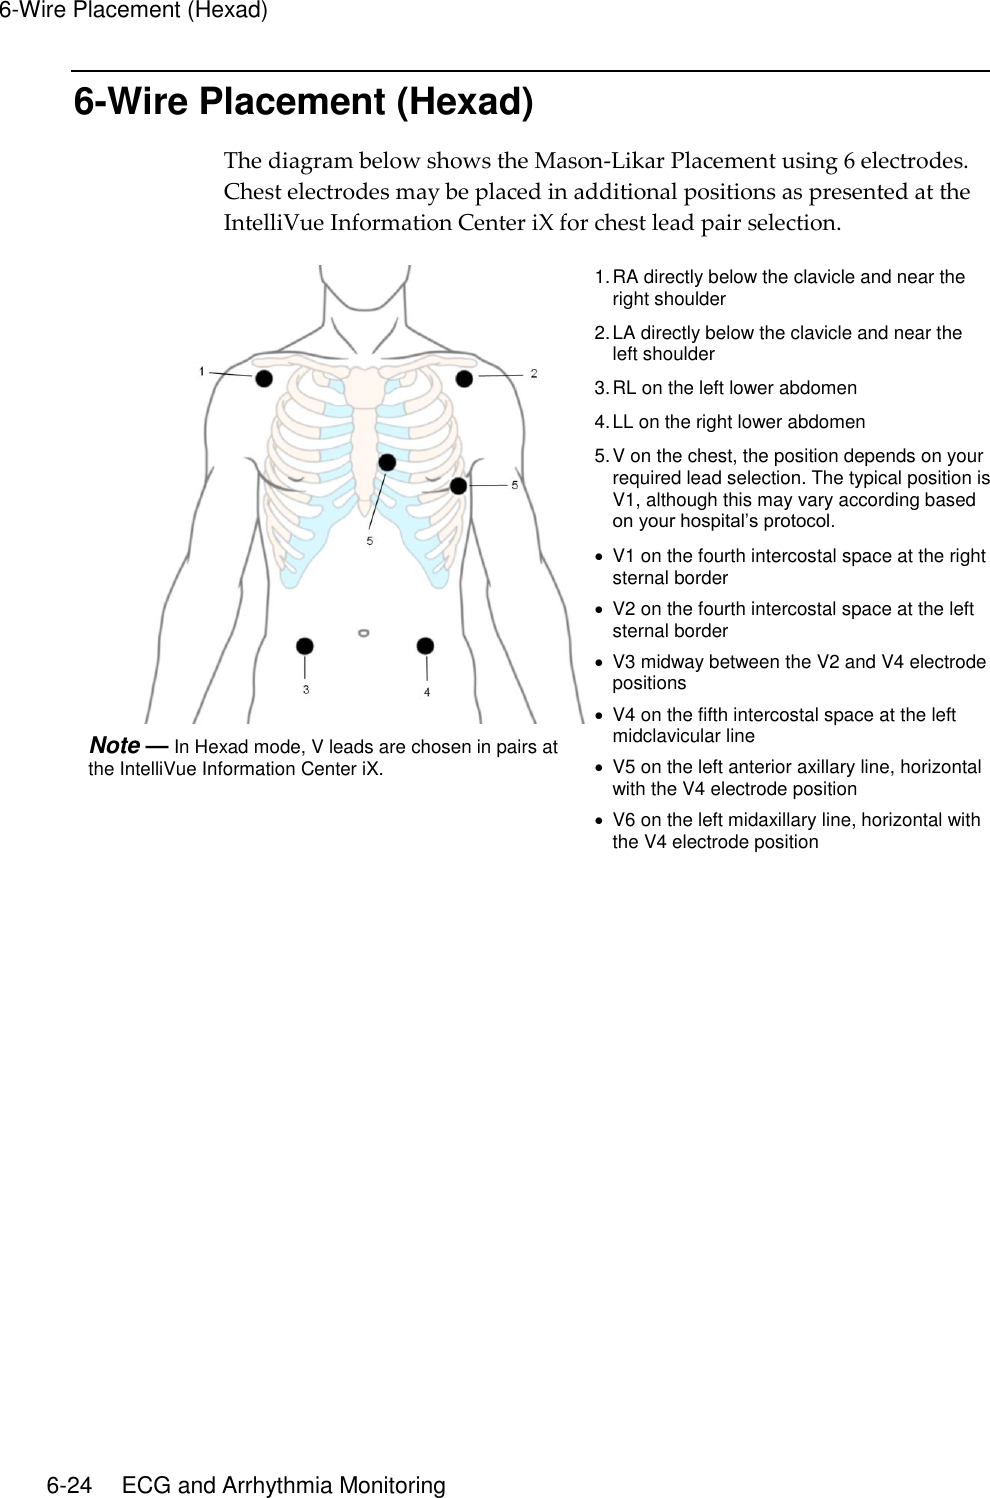 6-Wire Placement (Hexad)   6-24    ECG and Arrhythmia Monitoring 6-Wire Placement (Hexad) The diagram below shows the Mason-Likar Placement using 6 electrodes. Chest electrodes may be placed in additional positions as presented at the IntelliVue Information Center iX for chest lead pair selection.  Note — In Hexad mode, V leads are chosen in pairs at the IntelliVue Information Center iX. 1. RA directly below the clavicle and near the right shoulder 2. LA directly below the clavicle and near the left shoulder 3. RL on the left lower abdomen 4. LL on the right lower abdomen 5. V on the chest, the position depends on your required lead selection. The typical position is V1, although this may vary according based on your hospital’s protocol.   V1 on the fourth intercostal space at the right sternal border   V2 on the fourth intercostal space at the left sternal border   V3 midway between the V2 and V4 electrode positions   V4 on the fifth intercostal space at the left midclavicular line   V5 on the left anterior axillary line, horizontal with the V4 electrode position   V6 on the left midaxillary line, horizontal with the V4 electrode position   